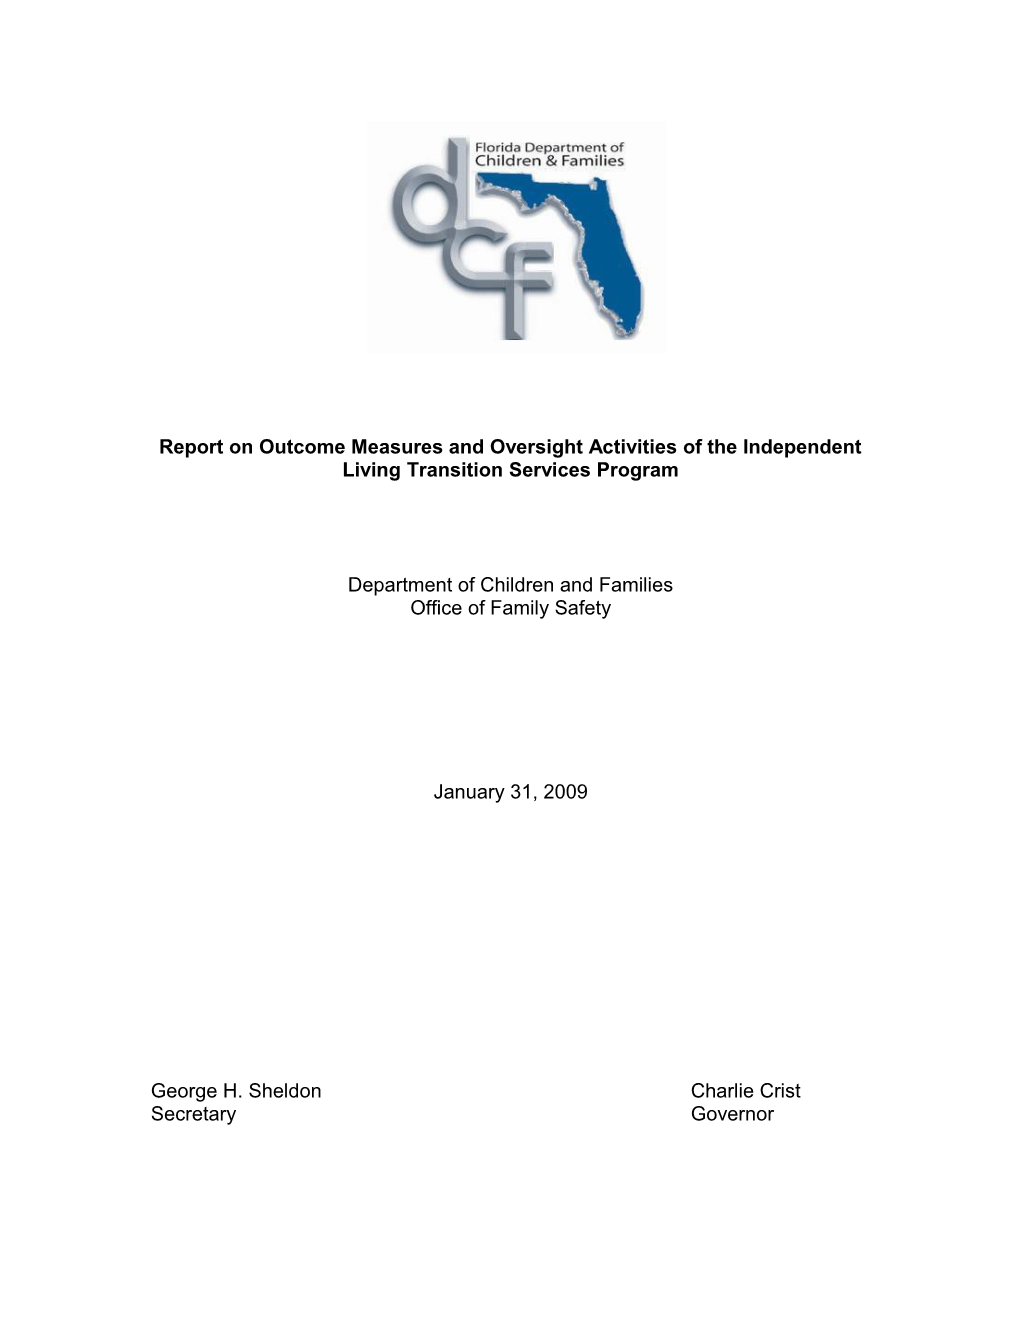 Report on Outcome Measures and Oversight Activities of the Independent Living Transition